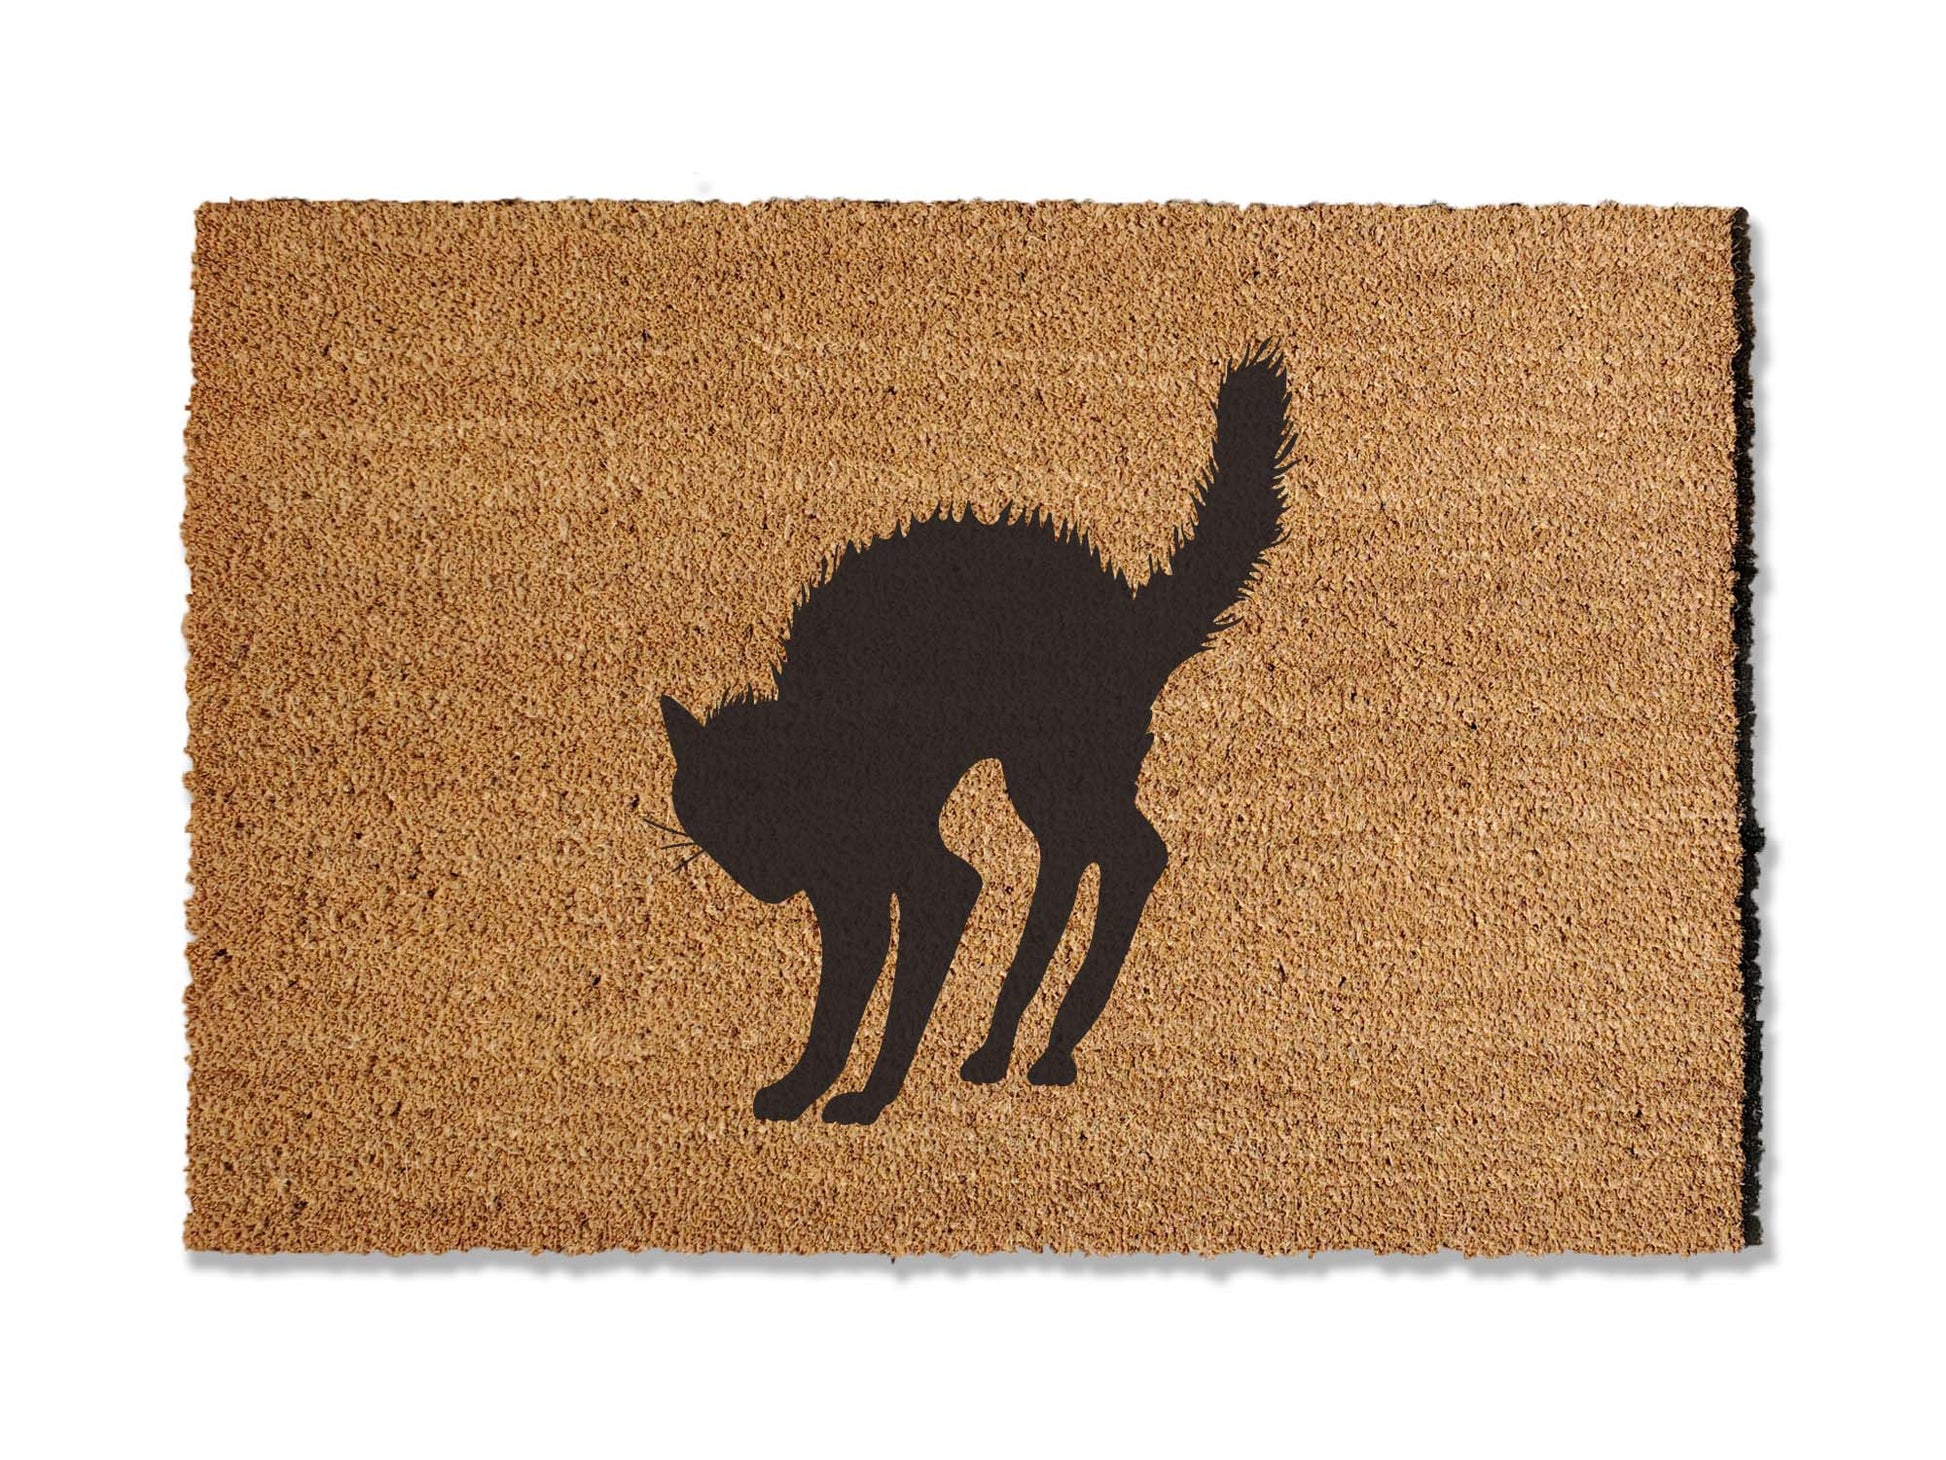 Halloween-themed 1/2 inch thick coir doormat with a scared black cat design. Perfect for adding a touch of spookiness to your entryway. This decorative mat is also highly effective at trapping dirt, combining style and functionality for a festive entrance.